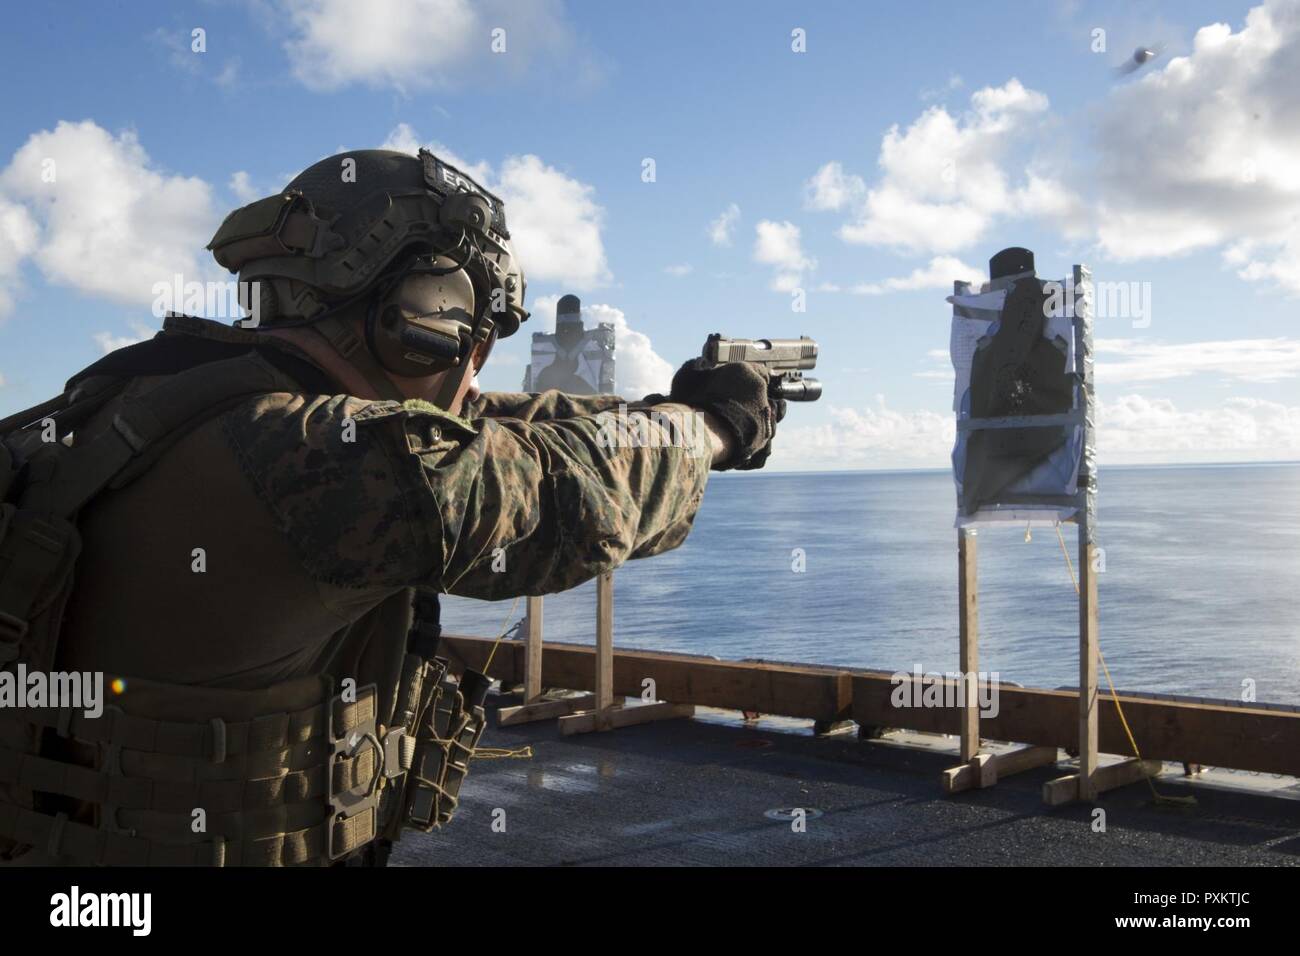 Staff Sgt. Cody Fazio, a reconnaissance Marine with the 31st Marine Expeditionary Unit's Force Reconnaissance Platoon (FRP), fires an M1911 .45-caliber pistol during marksmanship training aboard the USS Bonhomme Richard (LHD 6), June 15, 2017. FRP and the Amphibious Reconnaissance Platoon form the 31st MEU's Maritime Raid Force, which specializes in reconnaissance operations from the sea. The 31st MEU partners with the Navy’s Amphibious Squadron 11 to form the amphibious component of the Bonhomme Richard Expeditionary Strike Group. The 31st MEU and PHIBRON 11 combine to provide a cohesive blue Stock Photo